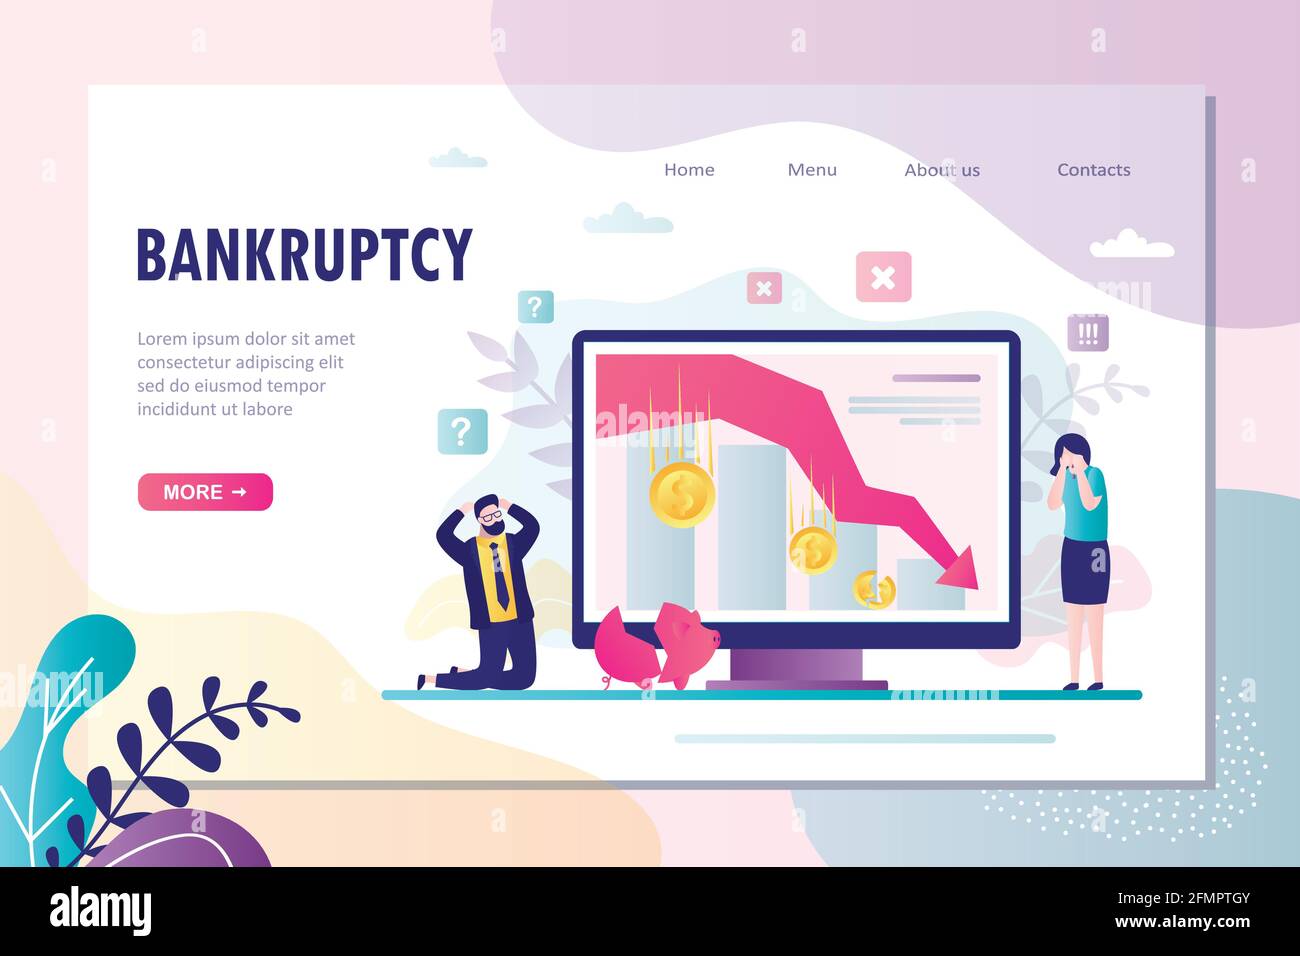 Bankruptcy landing page template. Frustrated businessman investor kneeling. Economic problems, global crisis and devaluation. Unhappy businesspeople. Stock Vector